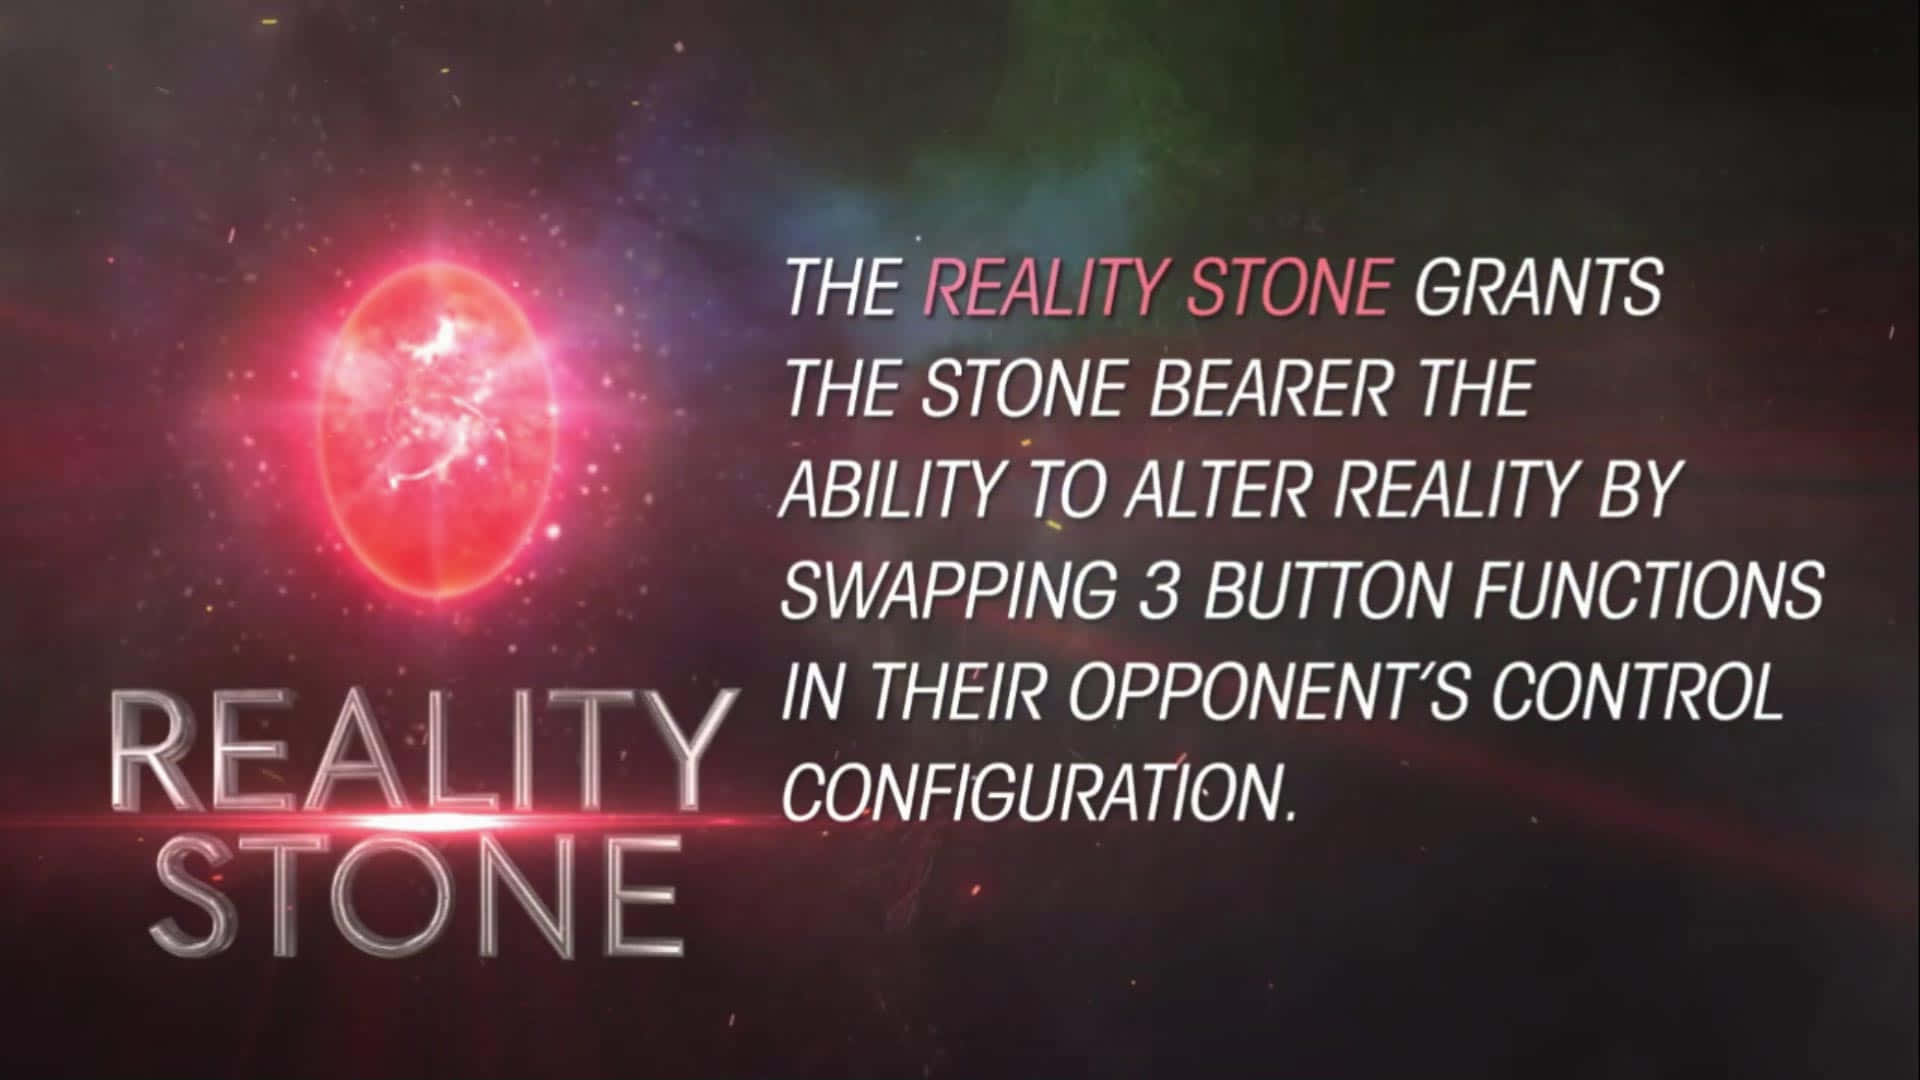 Mystical Reality Stone glowing in space Wallpaper